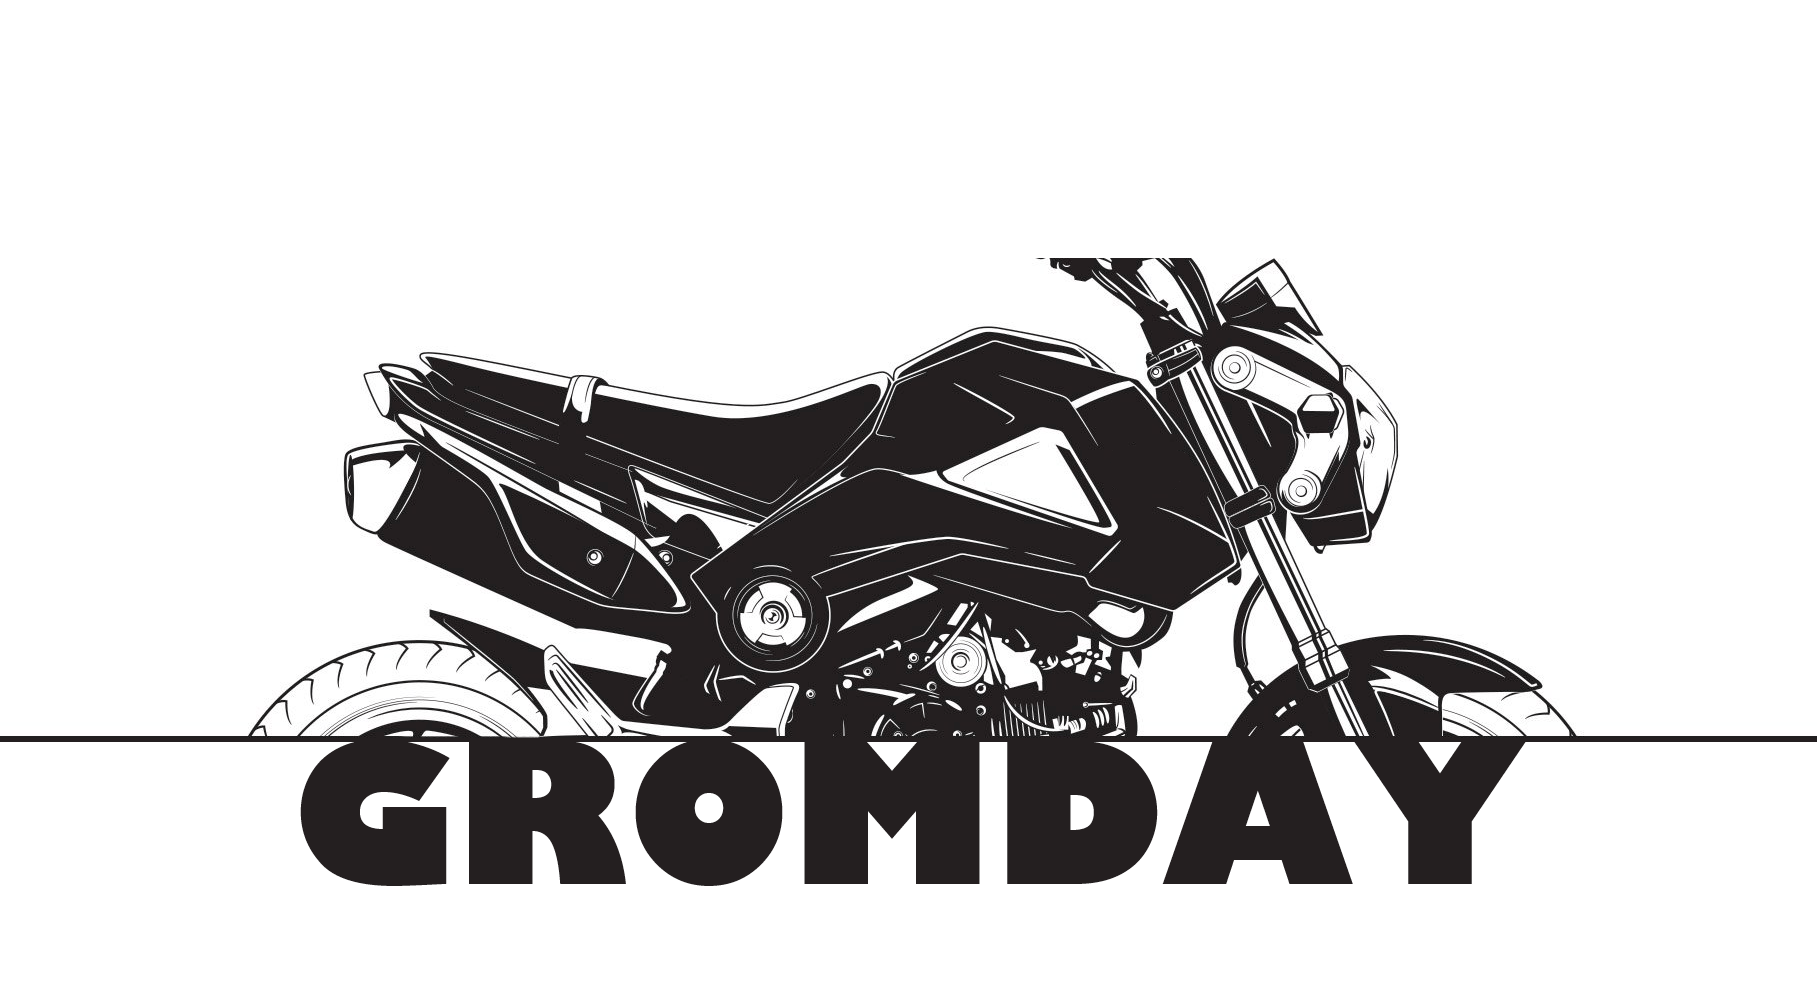 Gromday tshirt decal and wallpaper